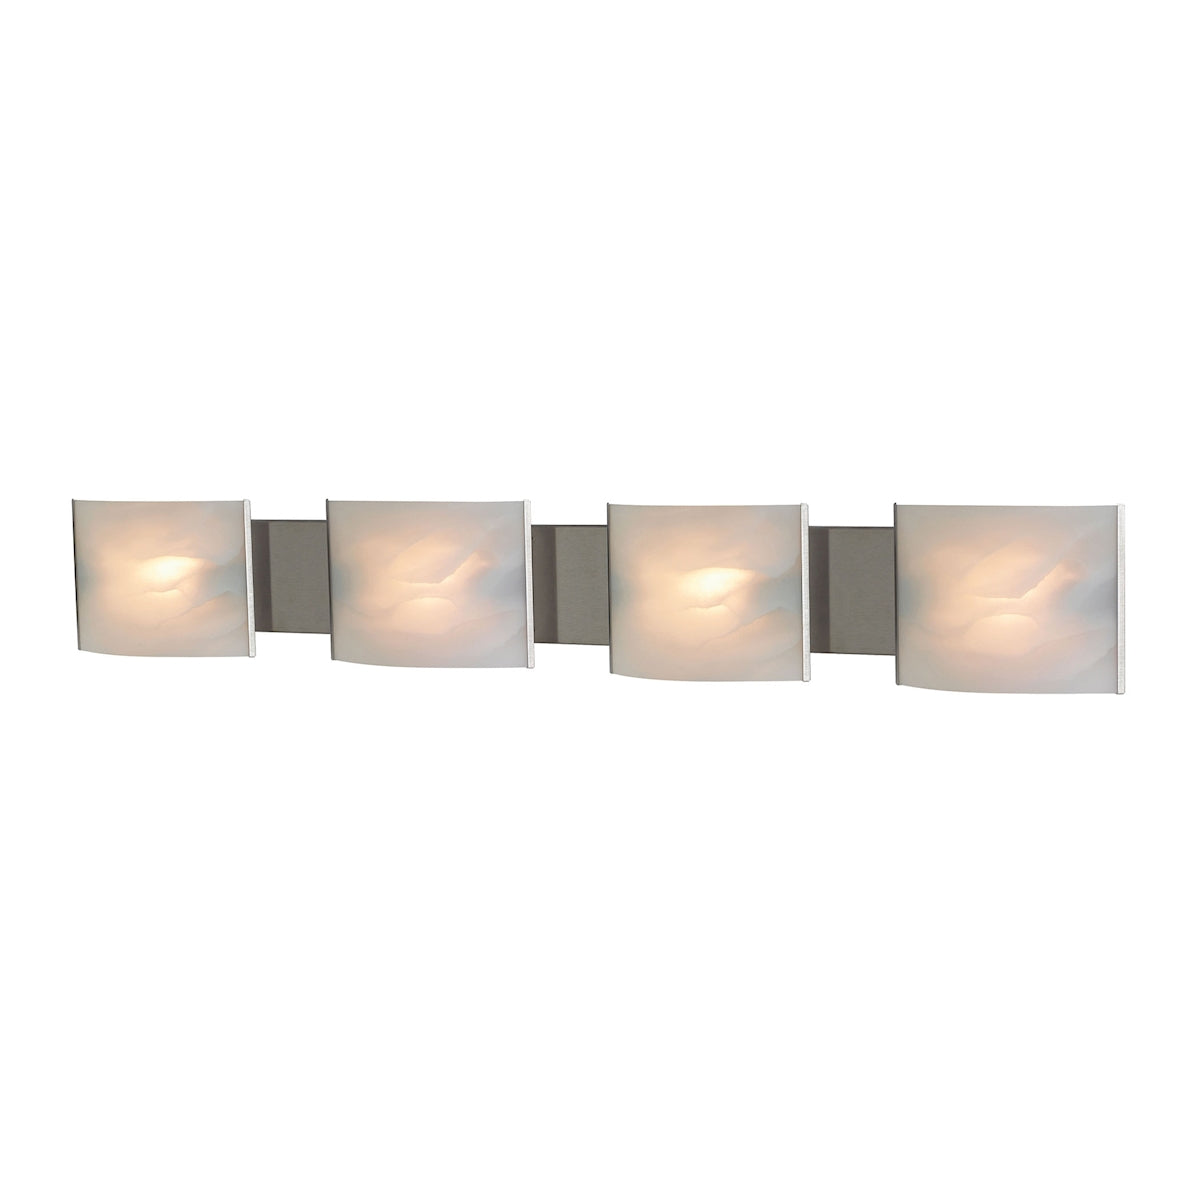 ELK Lighting BV714-6-16 Pannelli 4-Light Vanity Sconce in Stainless Steel with Hand-formed White Alabaster Glass